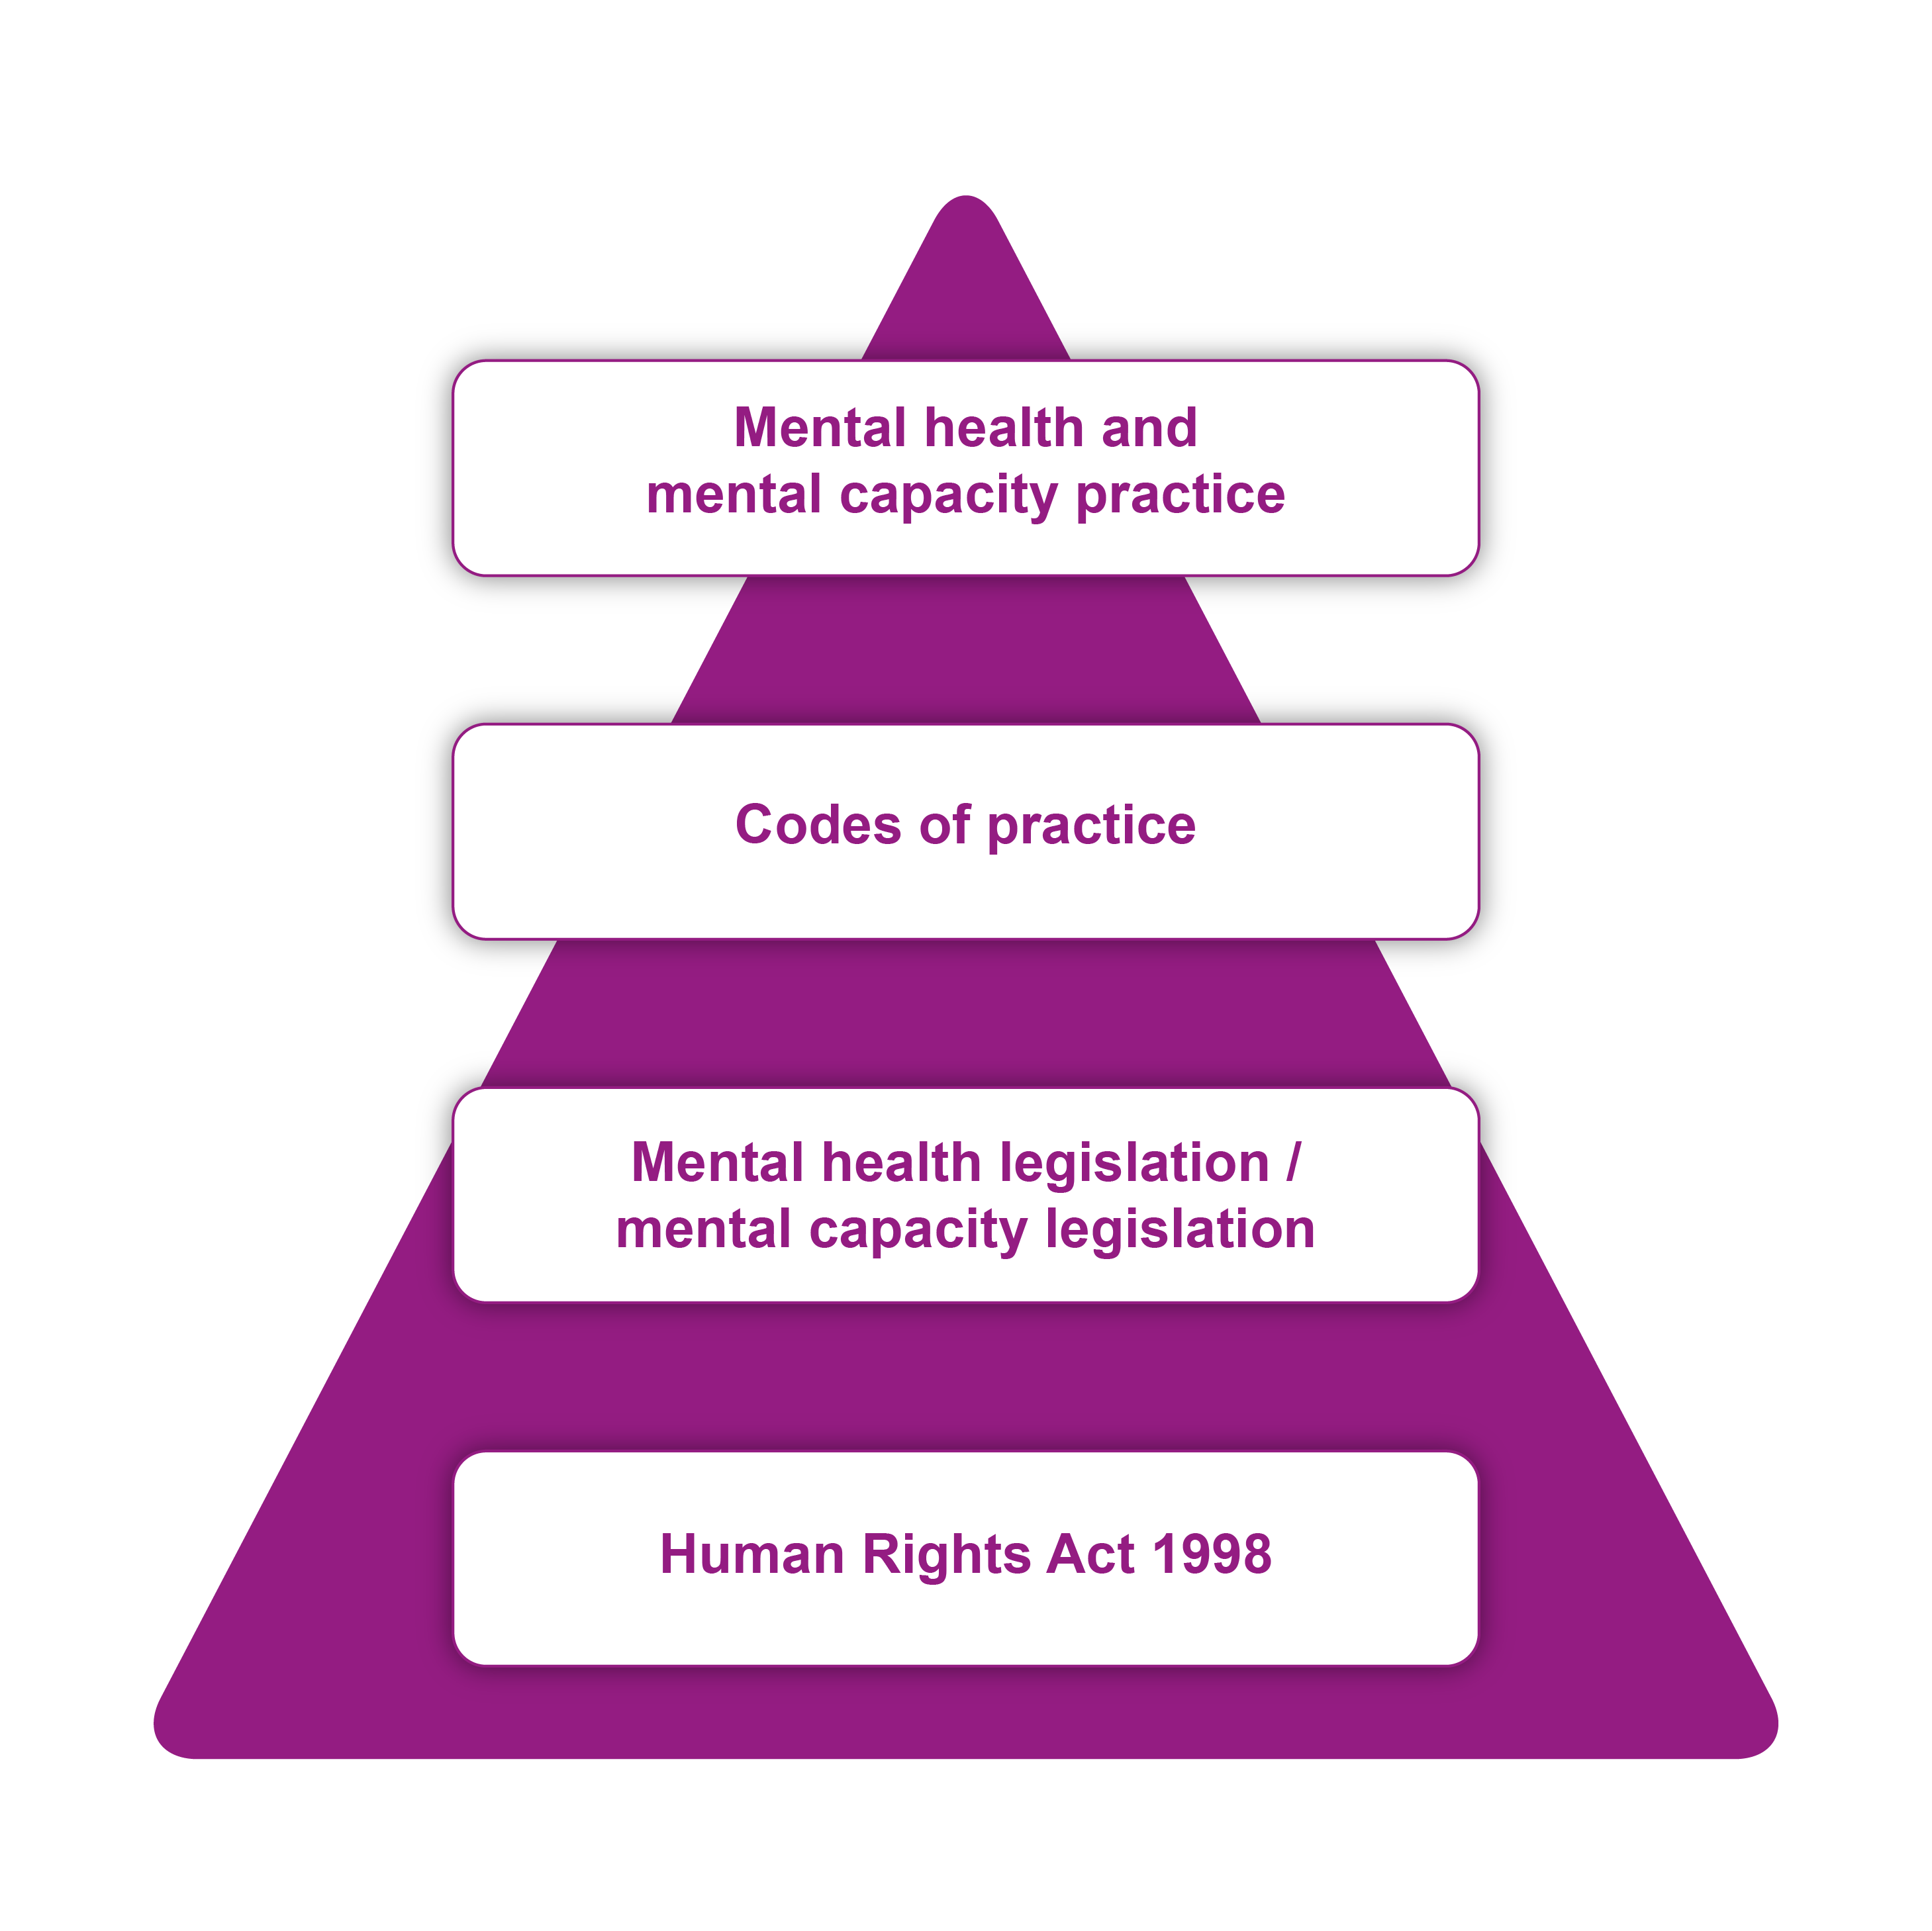 Diagram of a pyramid showing the Human Rights Act 1998 as the foundation for other laws, codes of practice and practice in relation to restrictive practice. See 